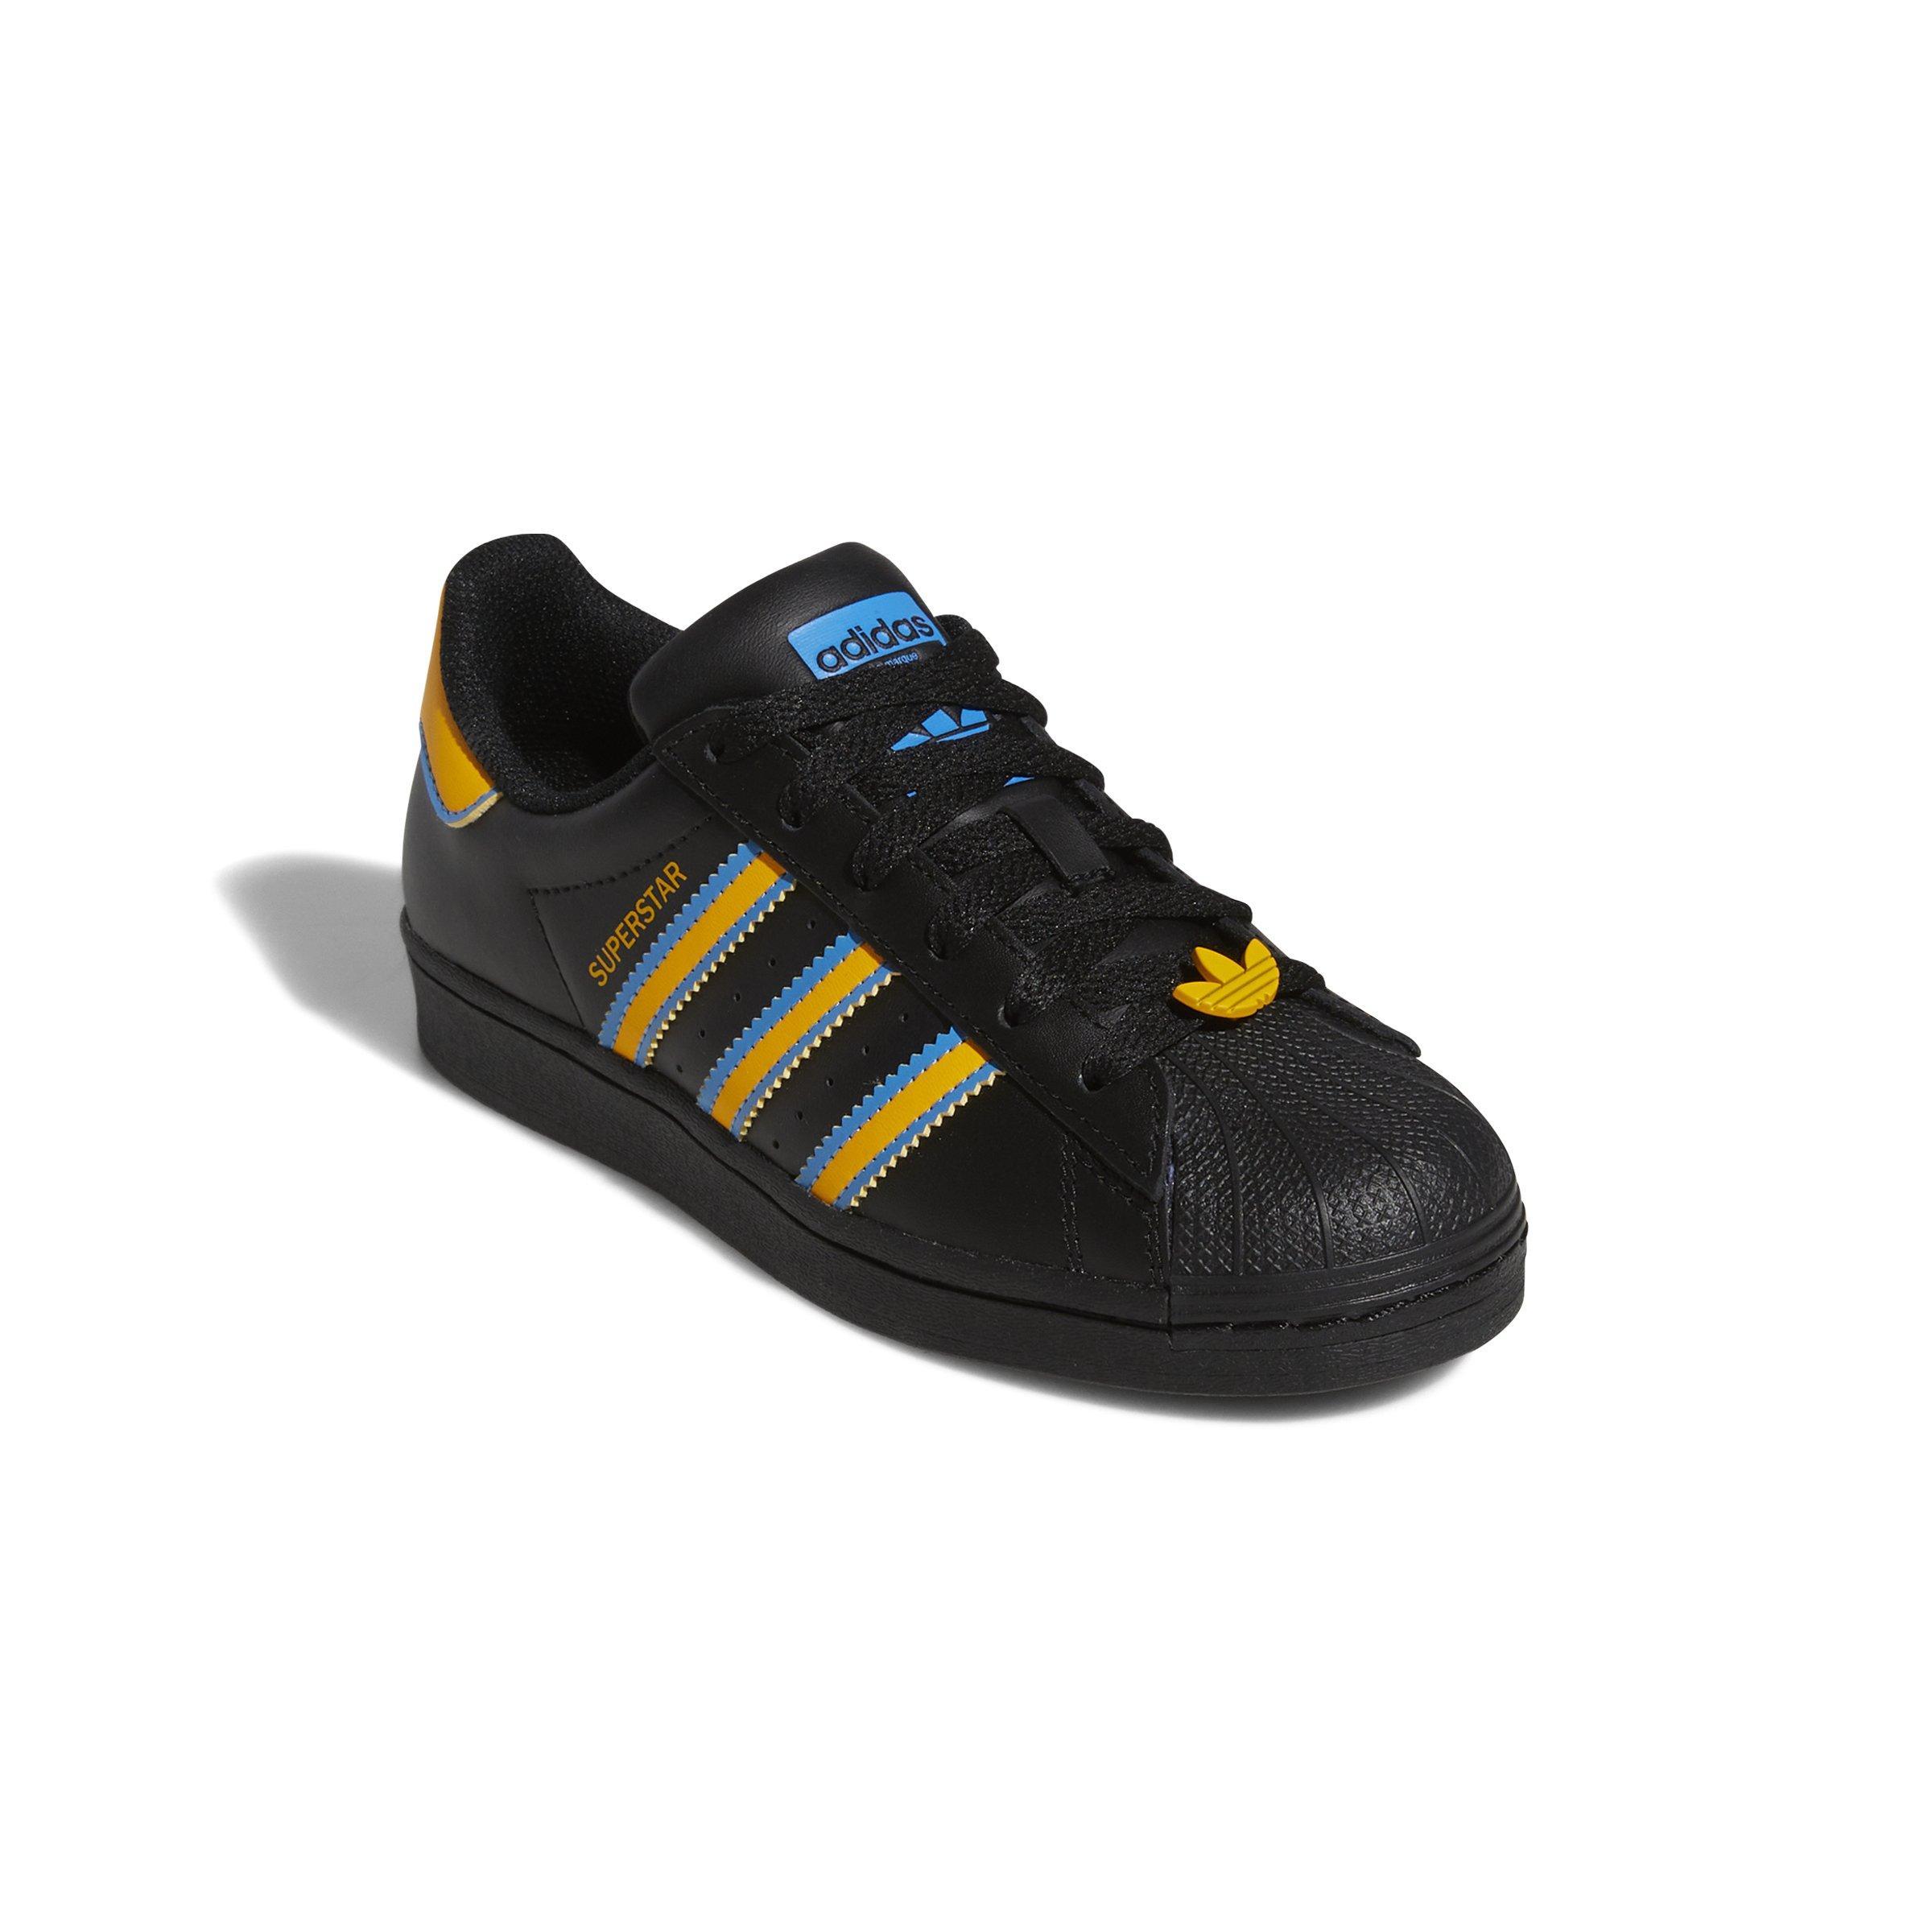 Adidas Superstar Men's Size 9 Casual Shoes Black Gold Blue Rare New FZ5892  New